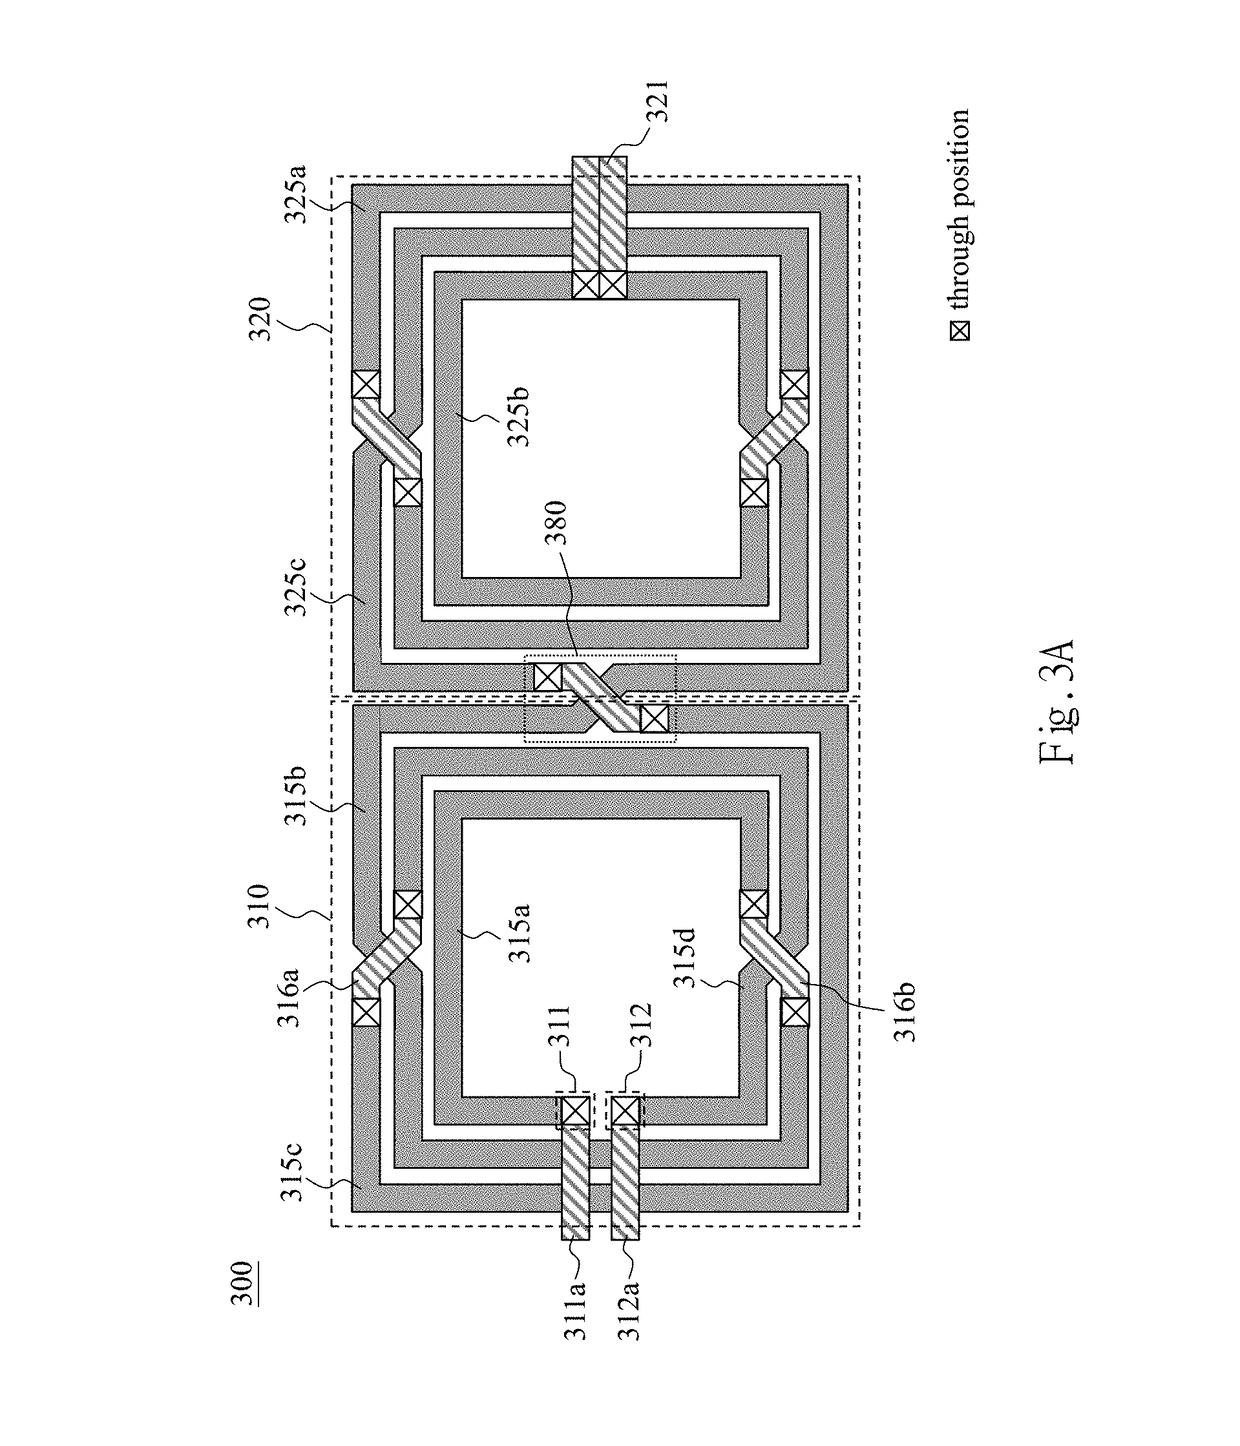 Integrated inductor structure and integrated transformer structure